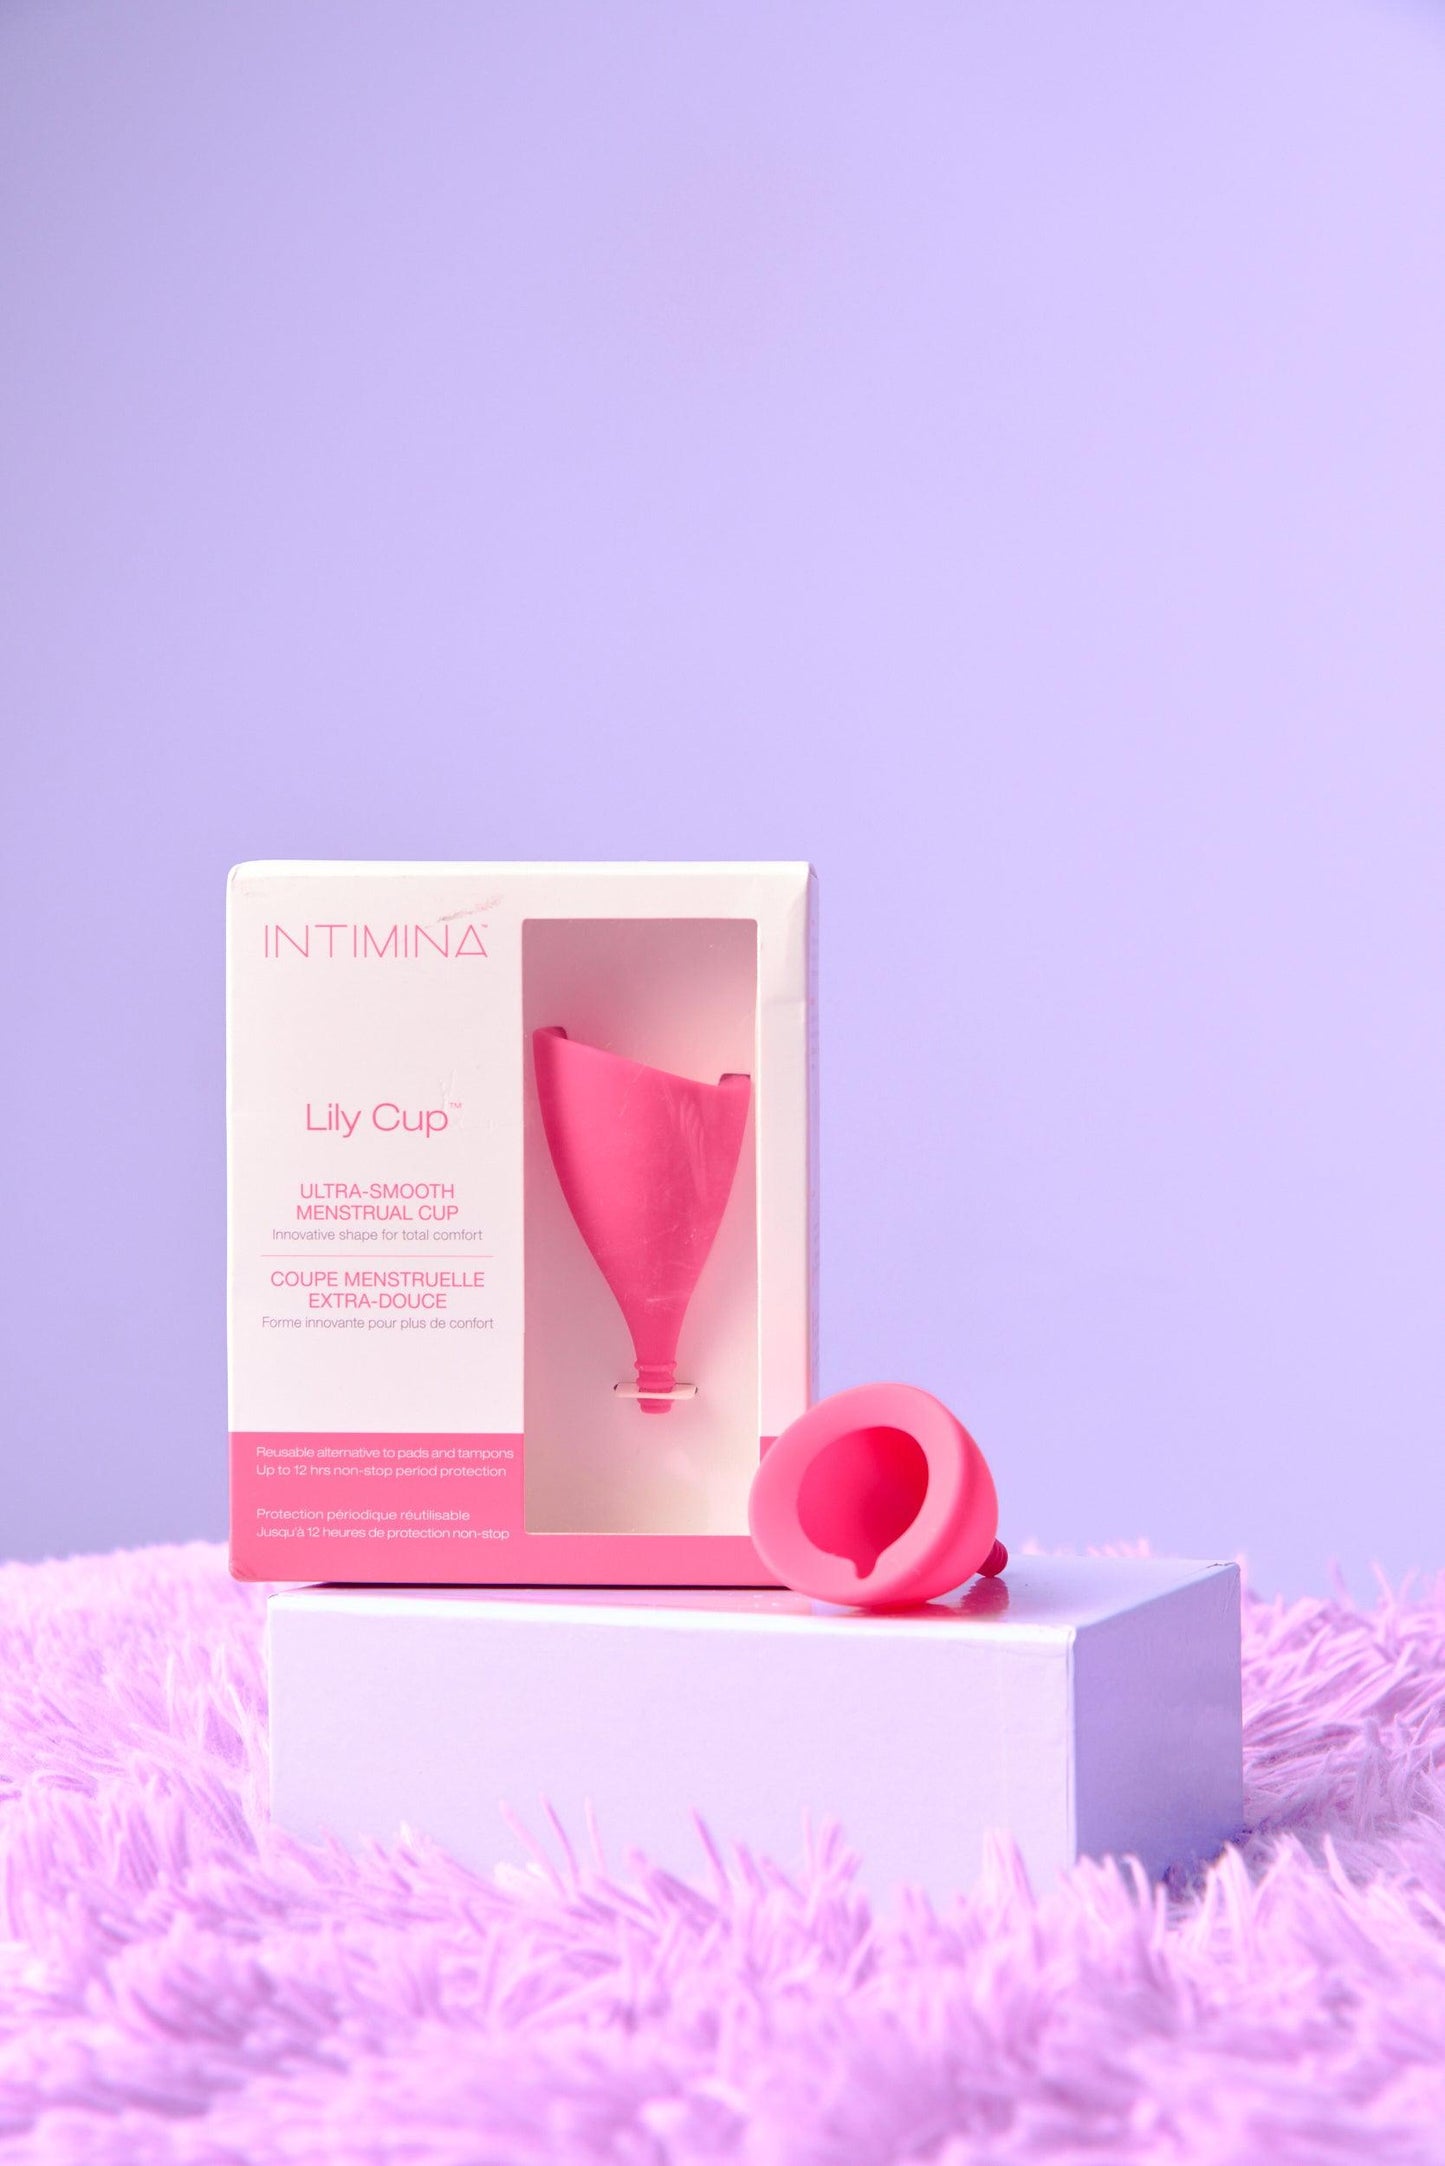 INTIMATE Lily Cup